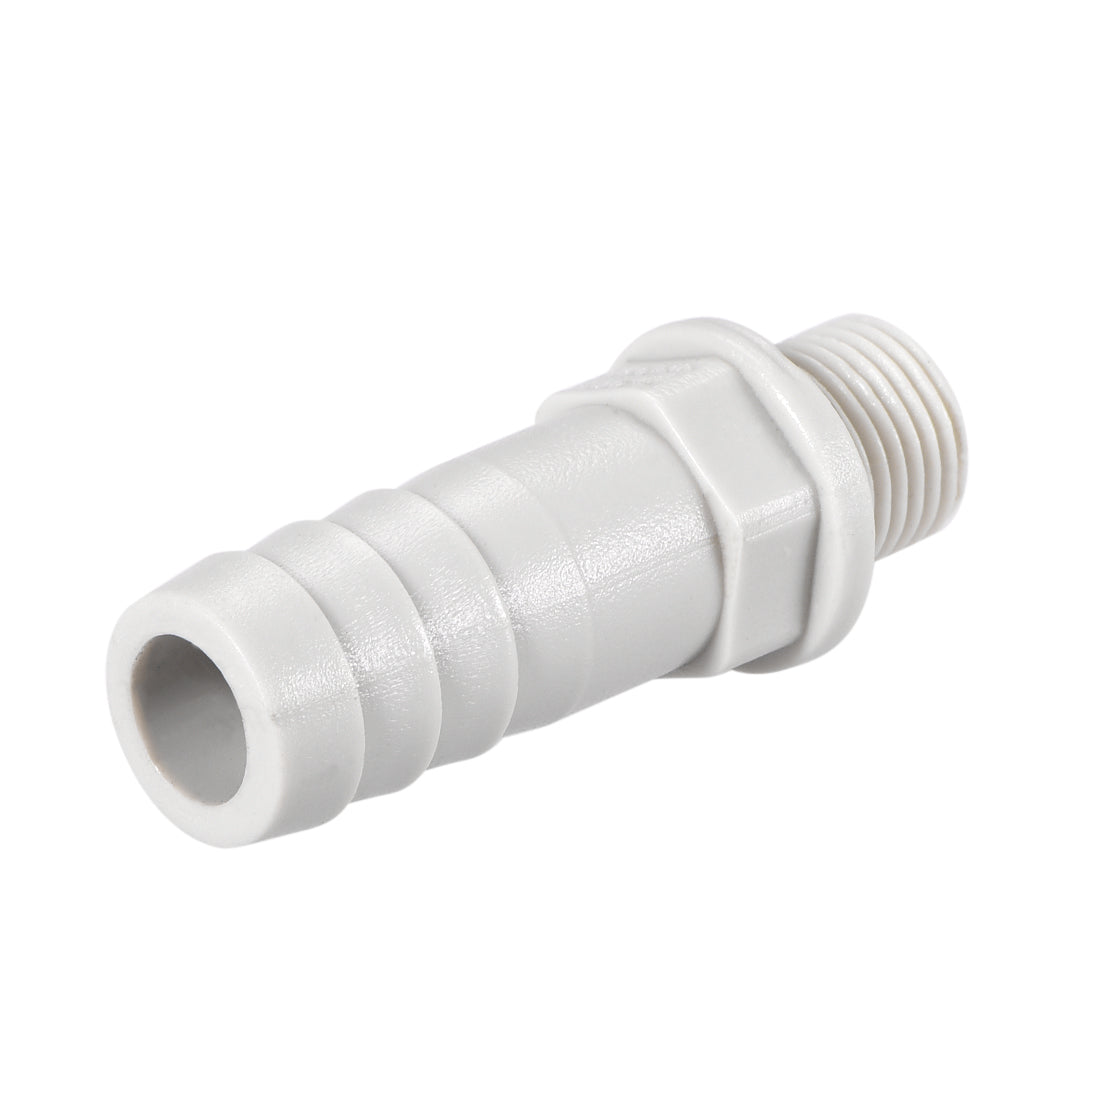 Uxcell Uxcell PVC Tube Fitting, Adapter, Barb Hose Connector, Gray, 10mm (25/64" )Barbed x G3/8 Male, 6pcs